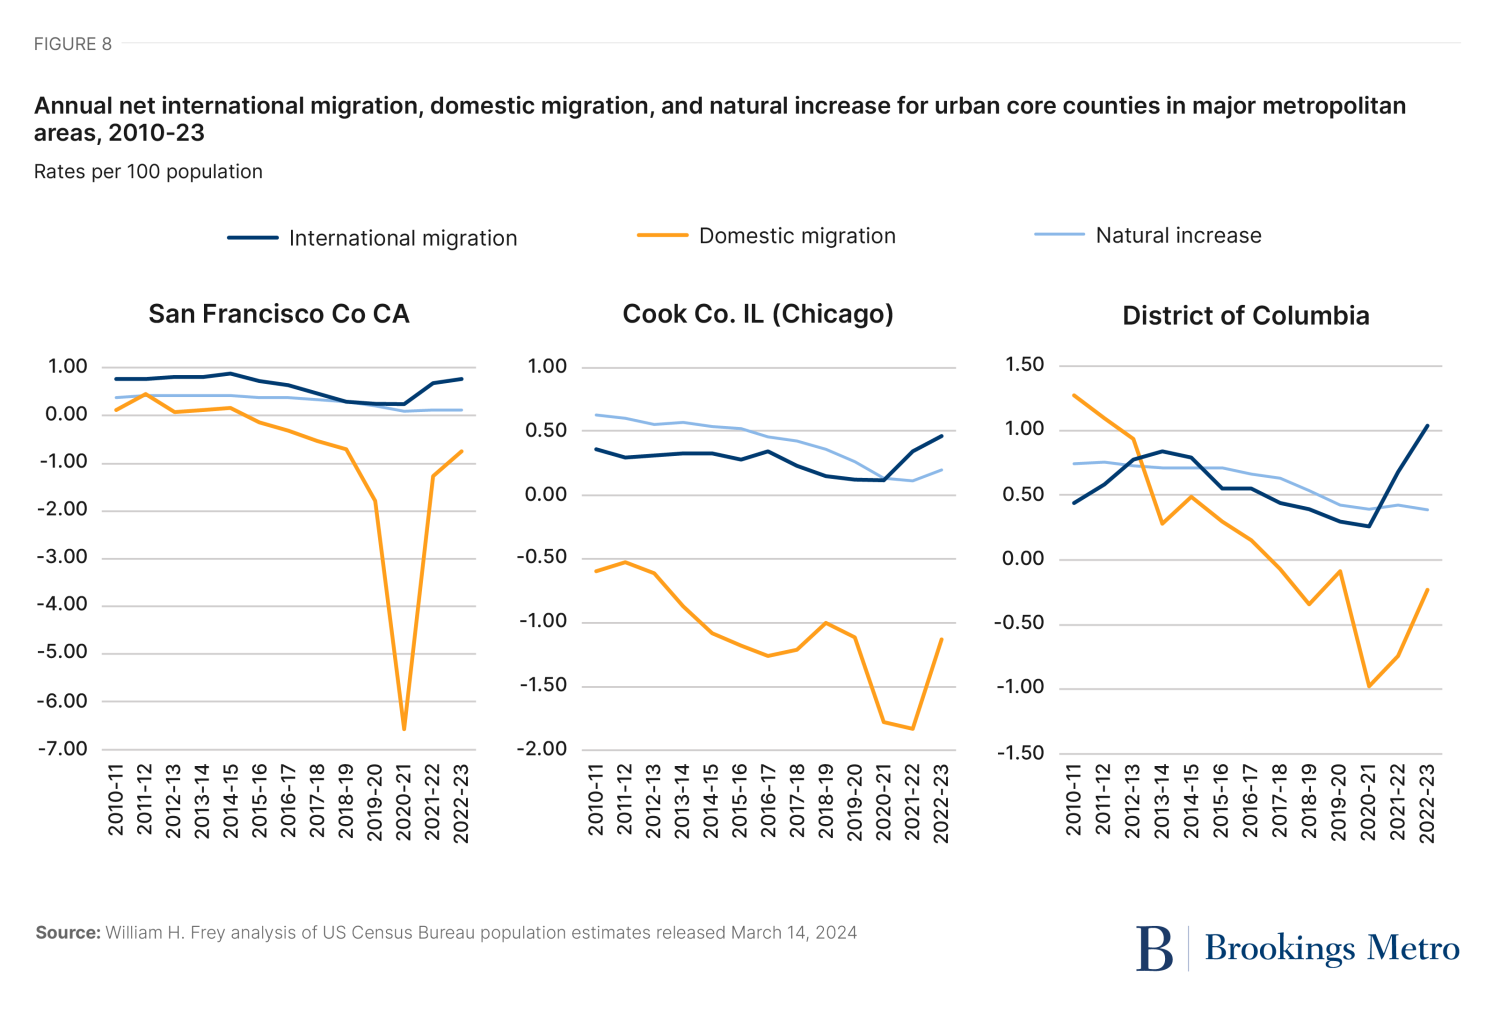 Figure 8. Annual Net Domestic Migration, International Migration and Natural Increase for Selected urban core counties of major metropolitan areas 2010-2023